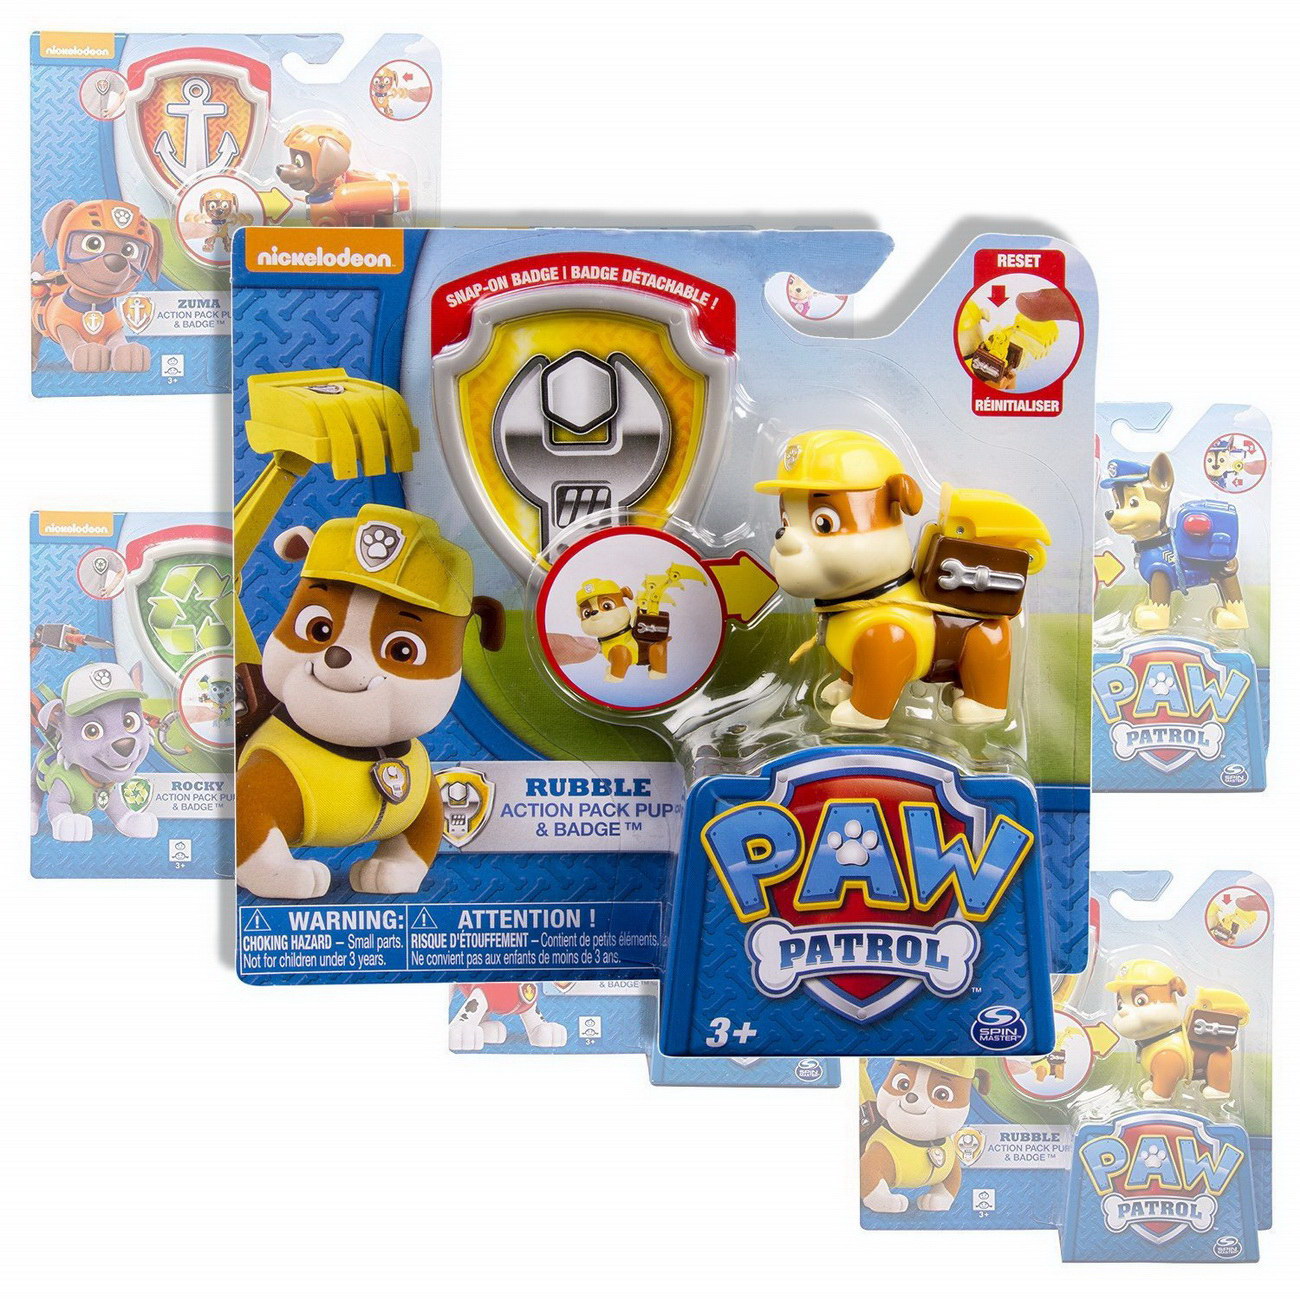 Rubble - Paw Patrol Action Pack Pup